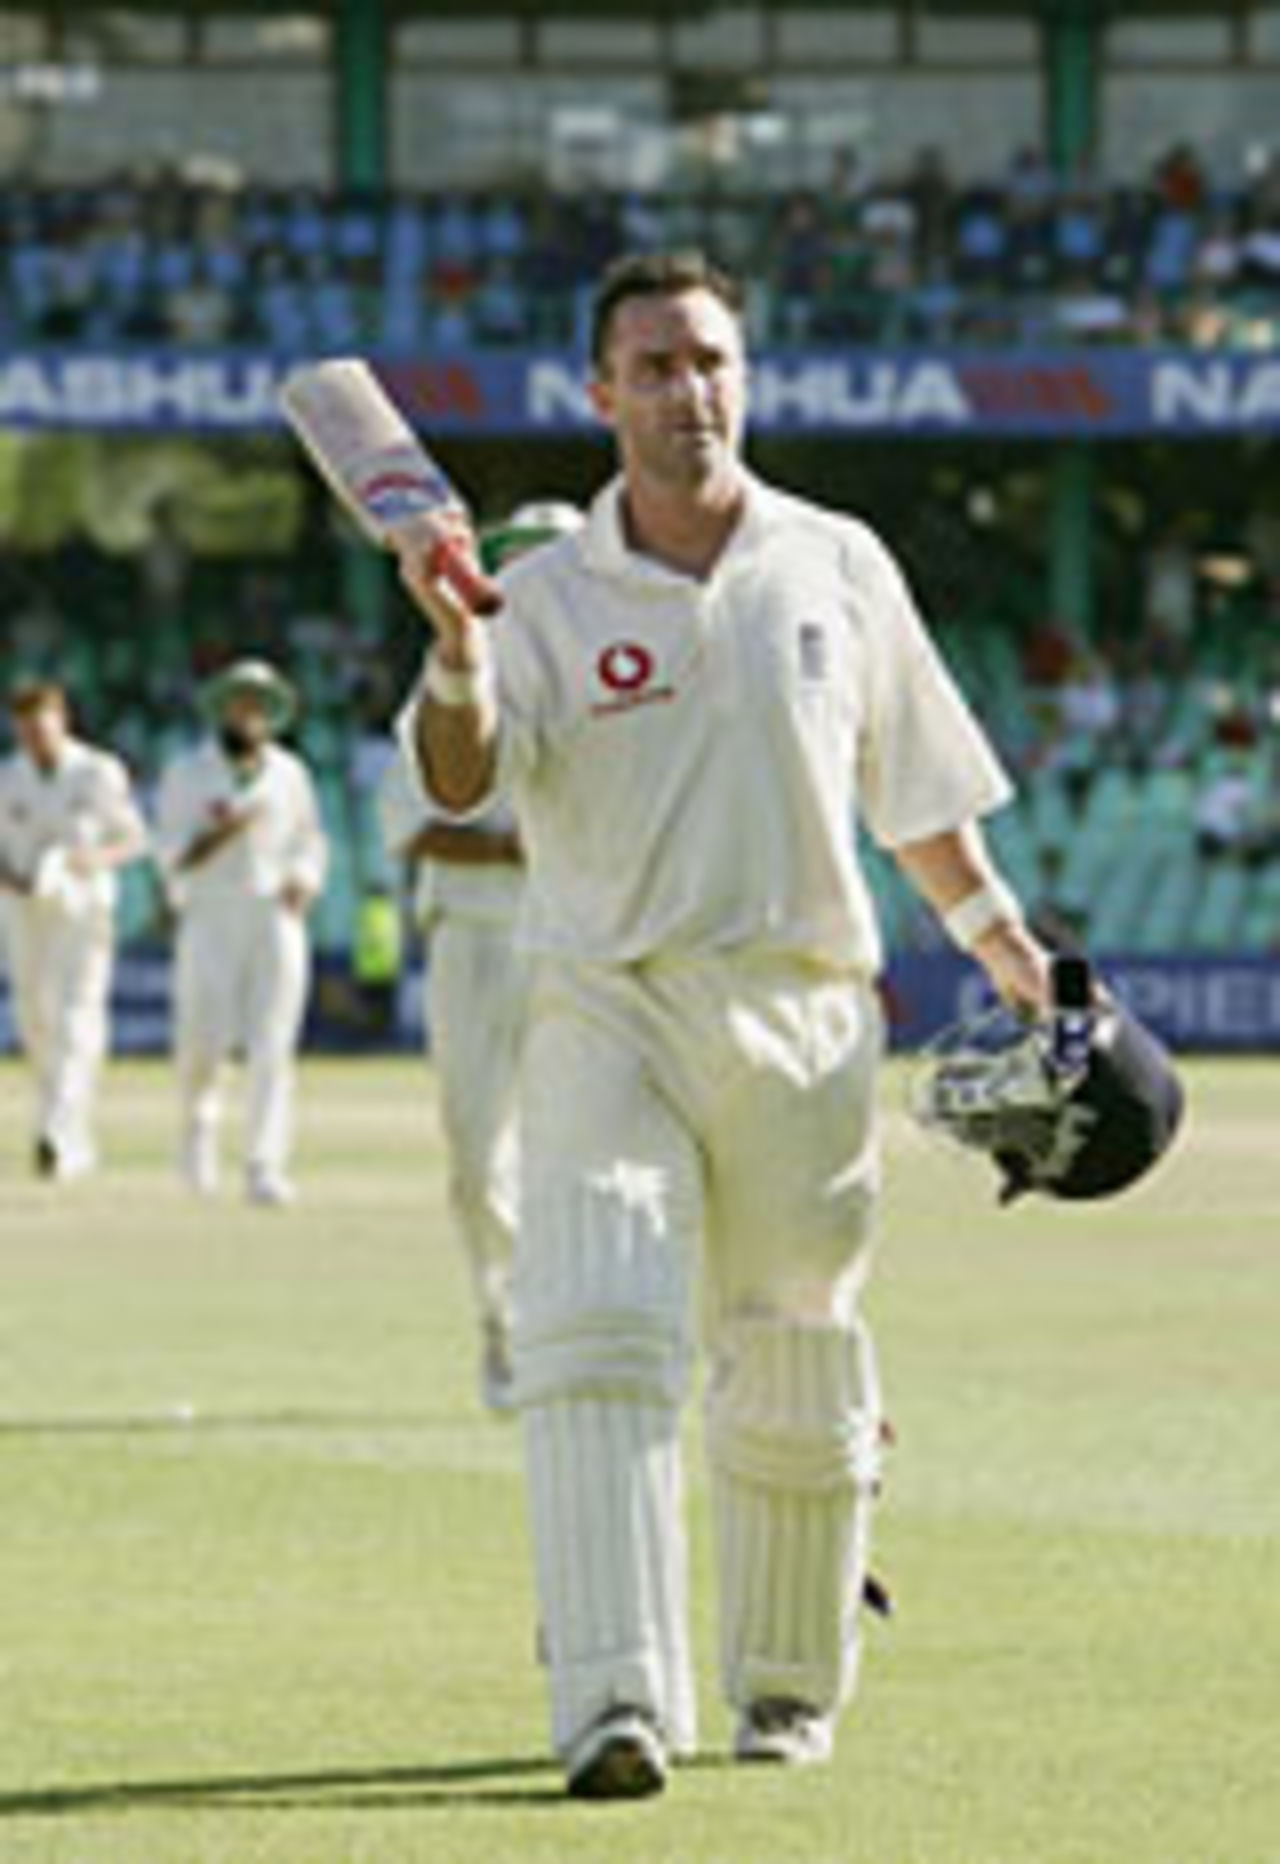 Graham Thorpe soaks up the applause, South Africa v England, 2nd Test, Durban, 4th day, December 29 2004